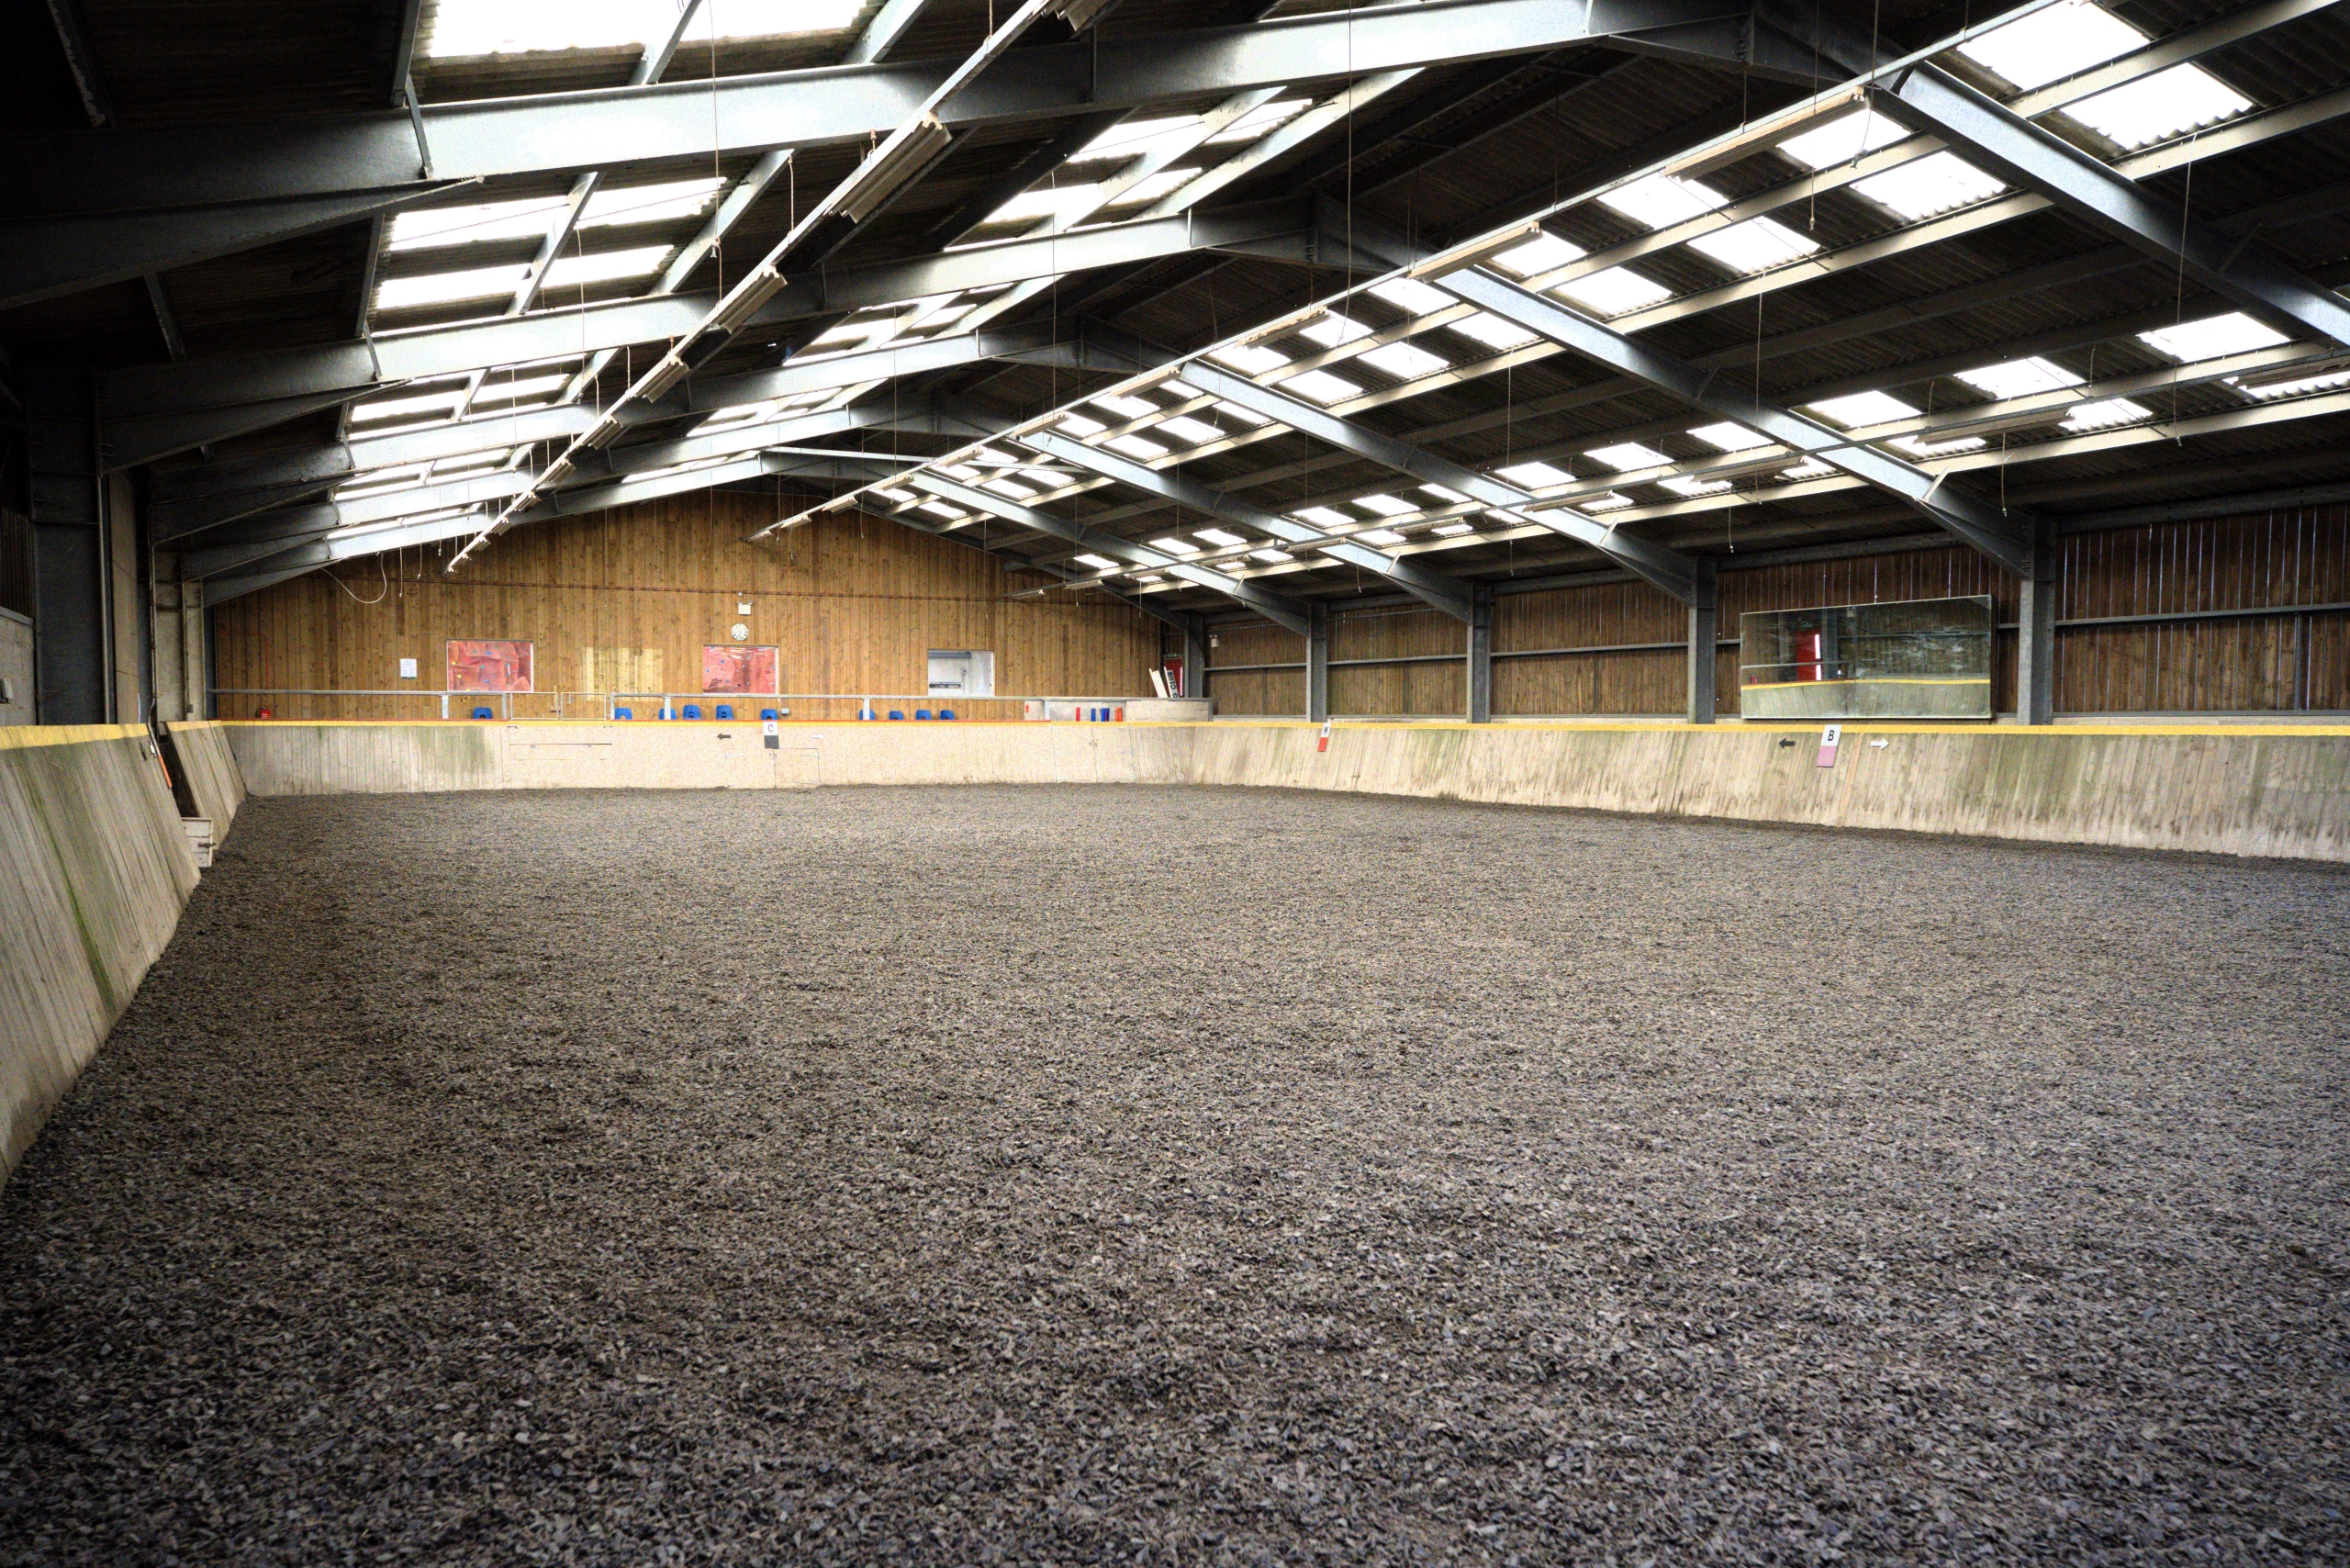 An empty indoor riding arena, with a floor of black rubber shavings, wooden walls and metal roofing with natural light. At the far end is a row of blue chairs in the viewing gallery.